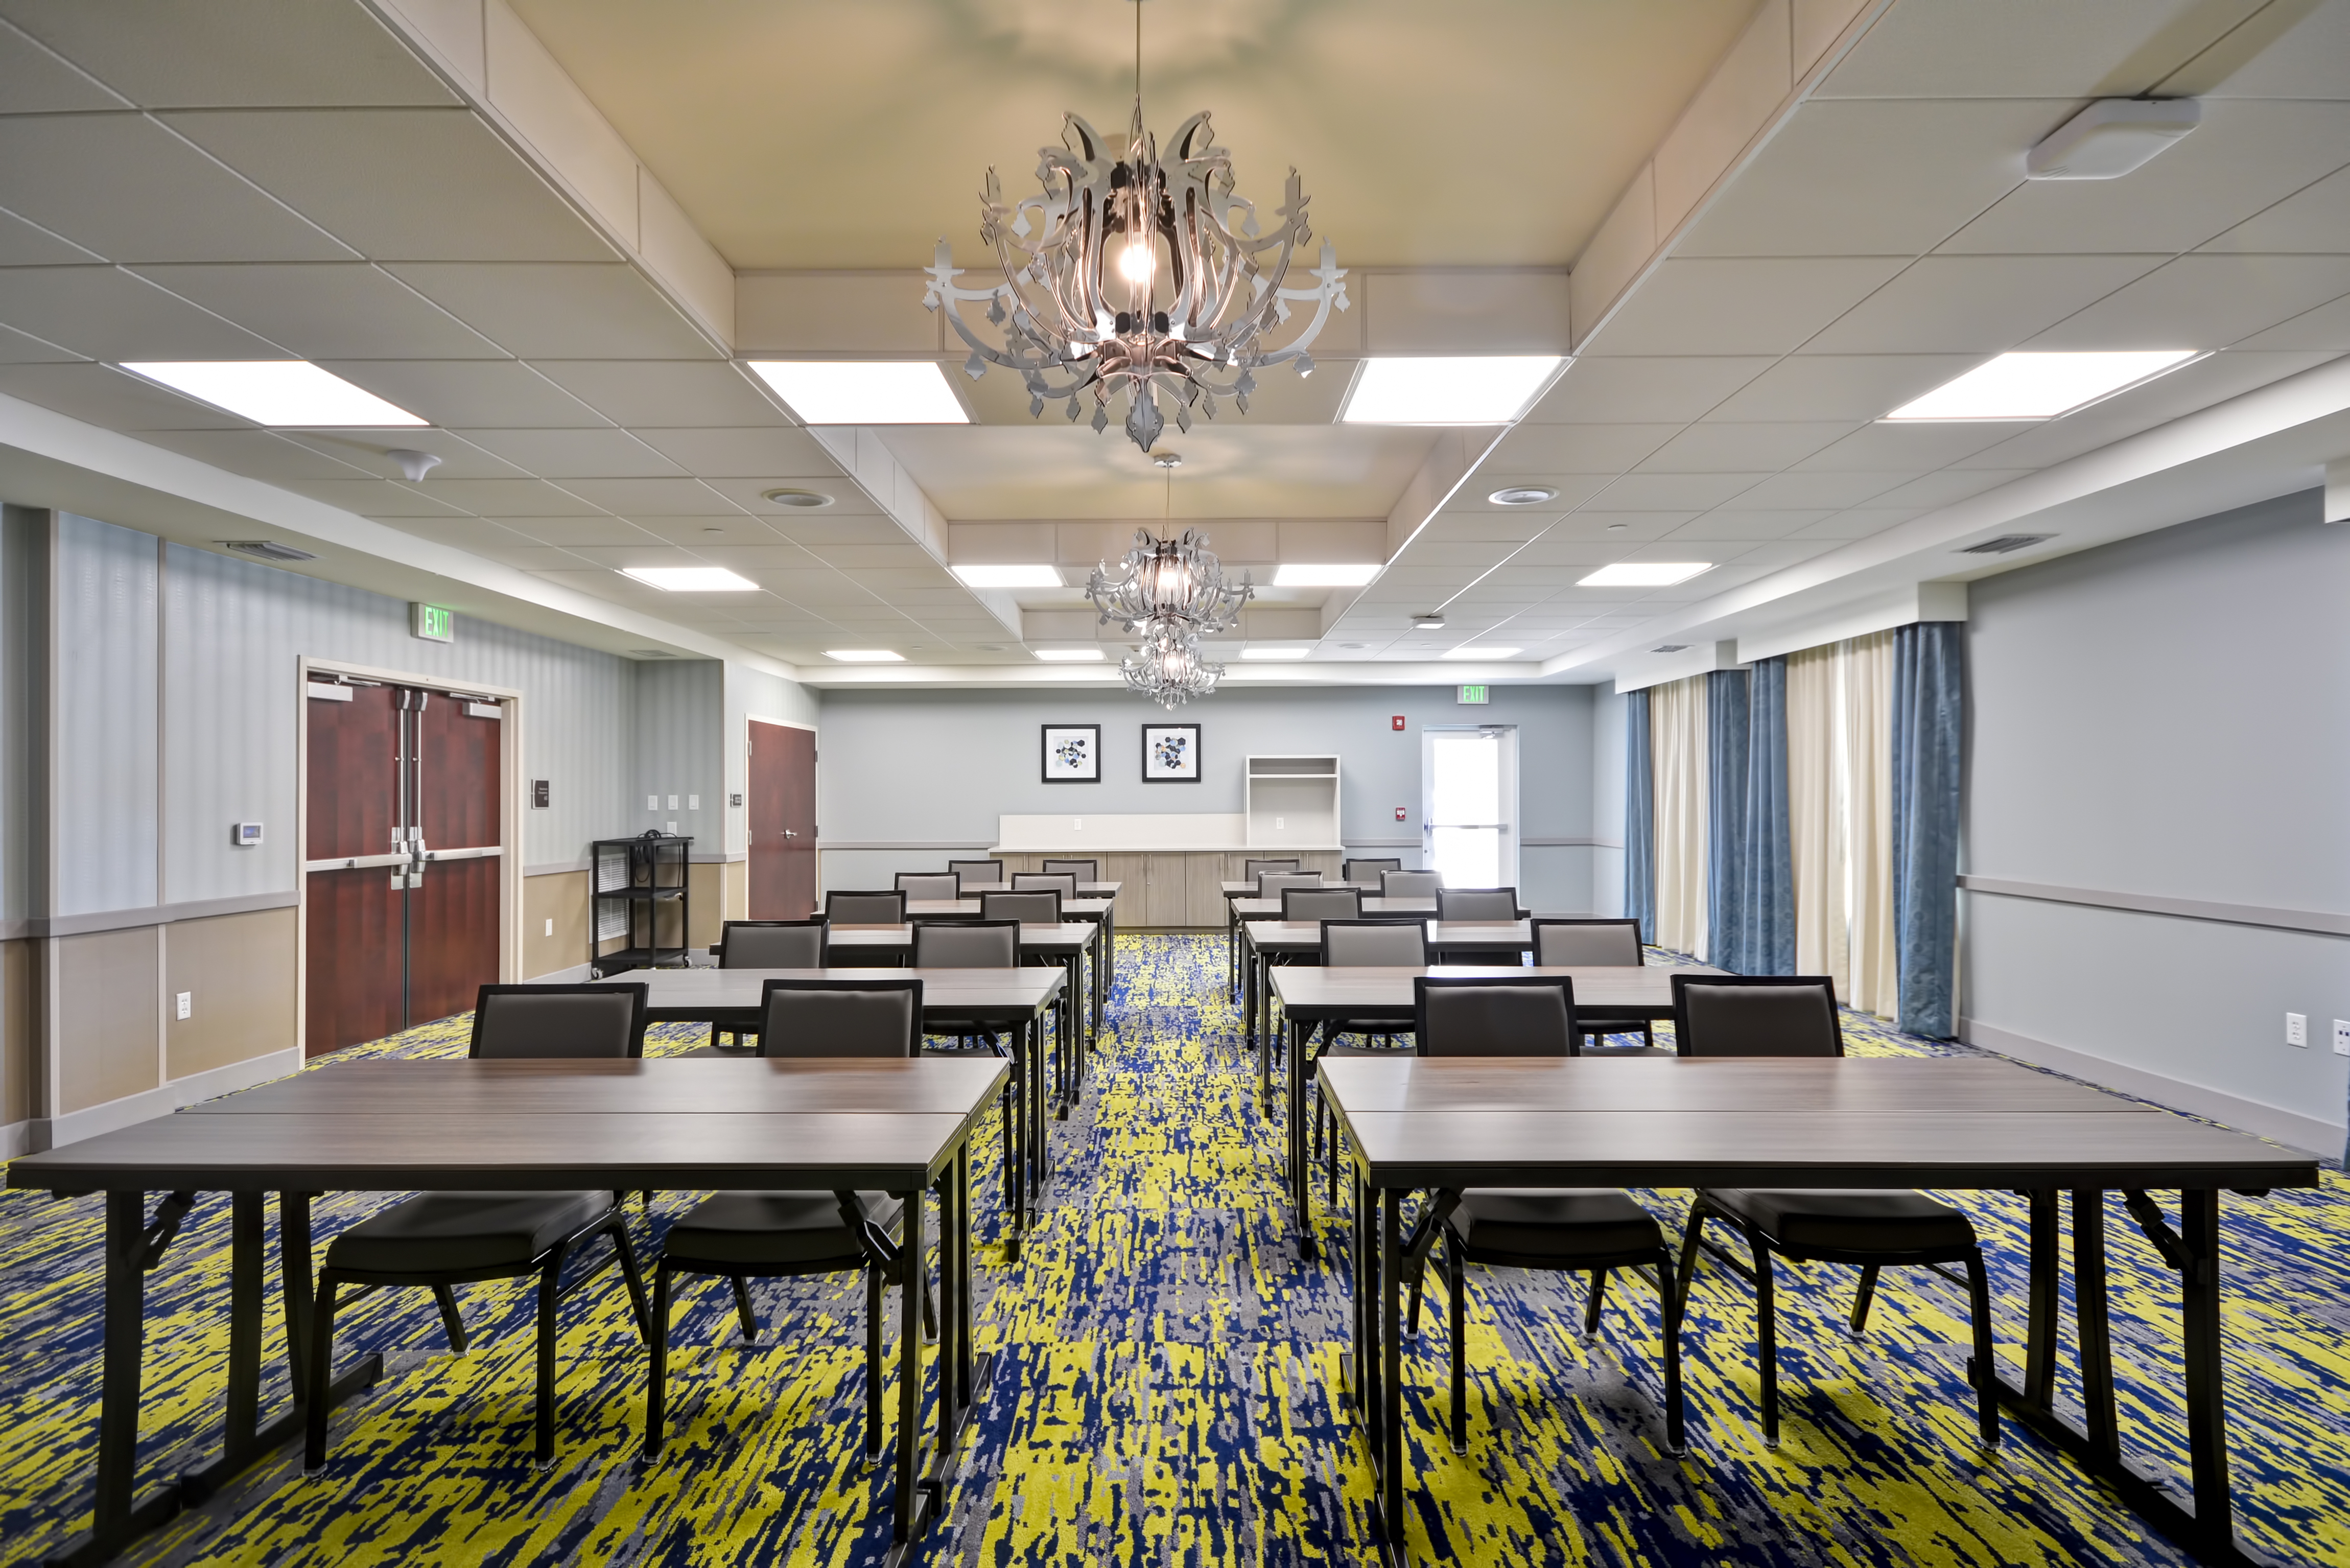 Homewood Suites by Hilton Orlando Theme Parks - Meeting Space Classroom Setup Front View